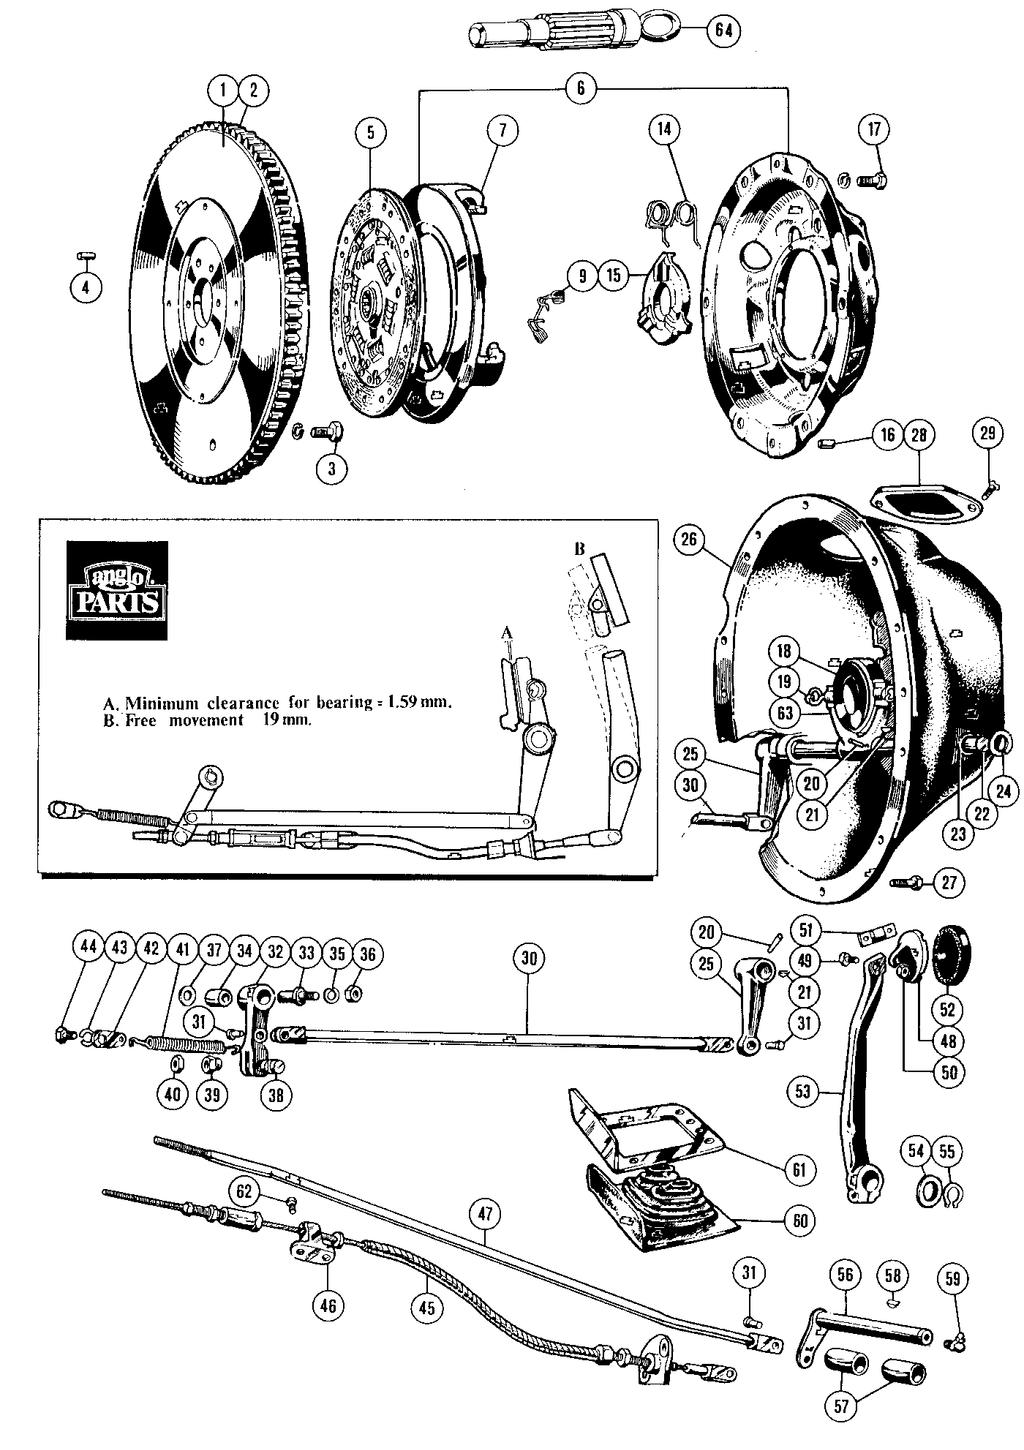 MGTD-TF 1949-1955 - Clutch kits | Webshop Anglo Parts - Clutch & components - 1